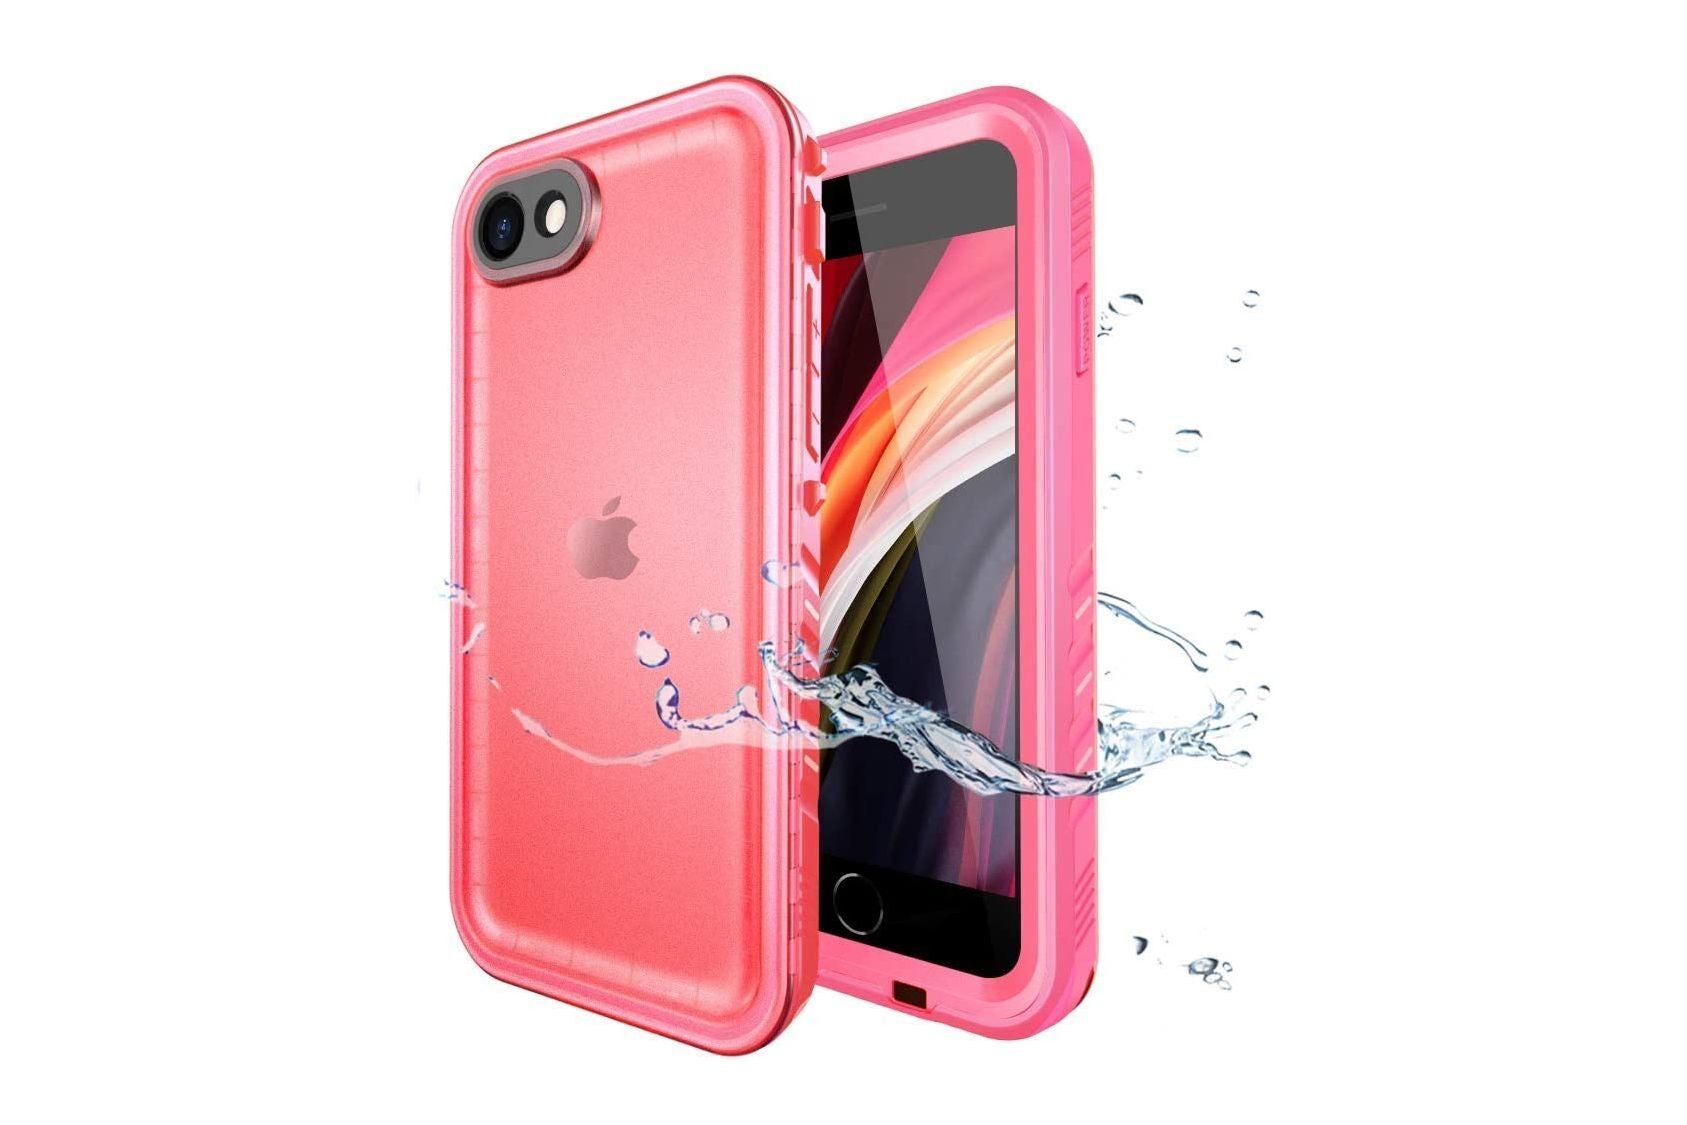 Top Picks For The Best Waterproof Cases For IPhone SE